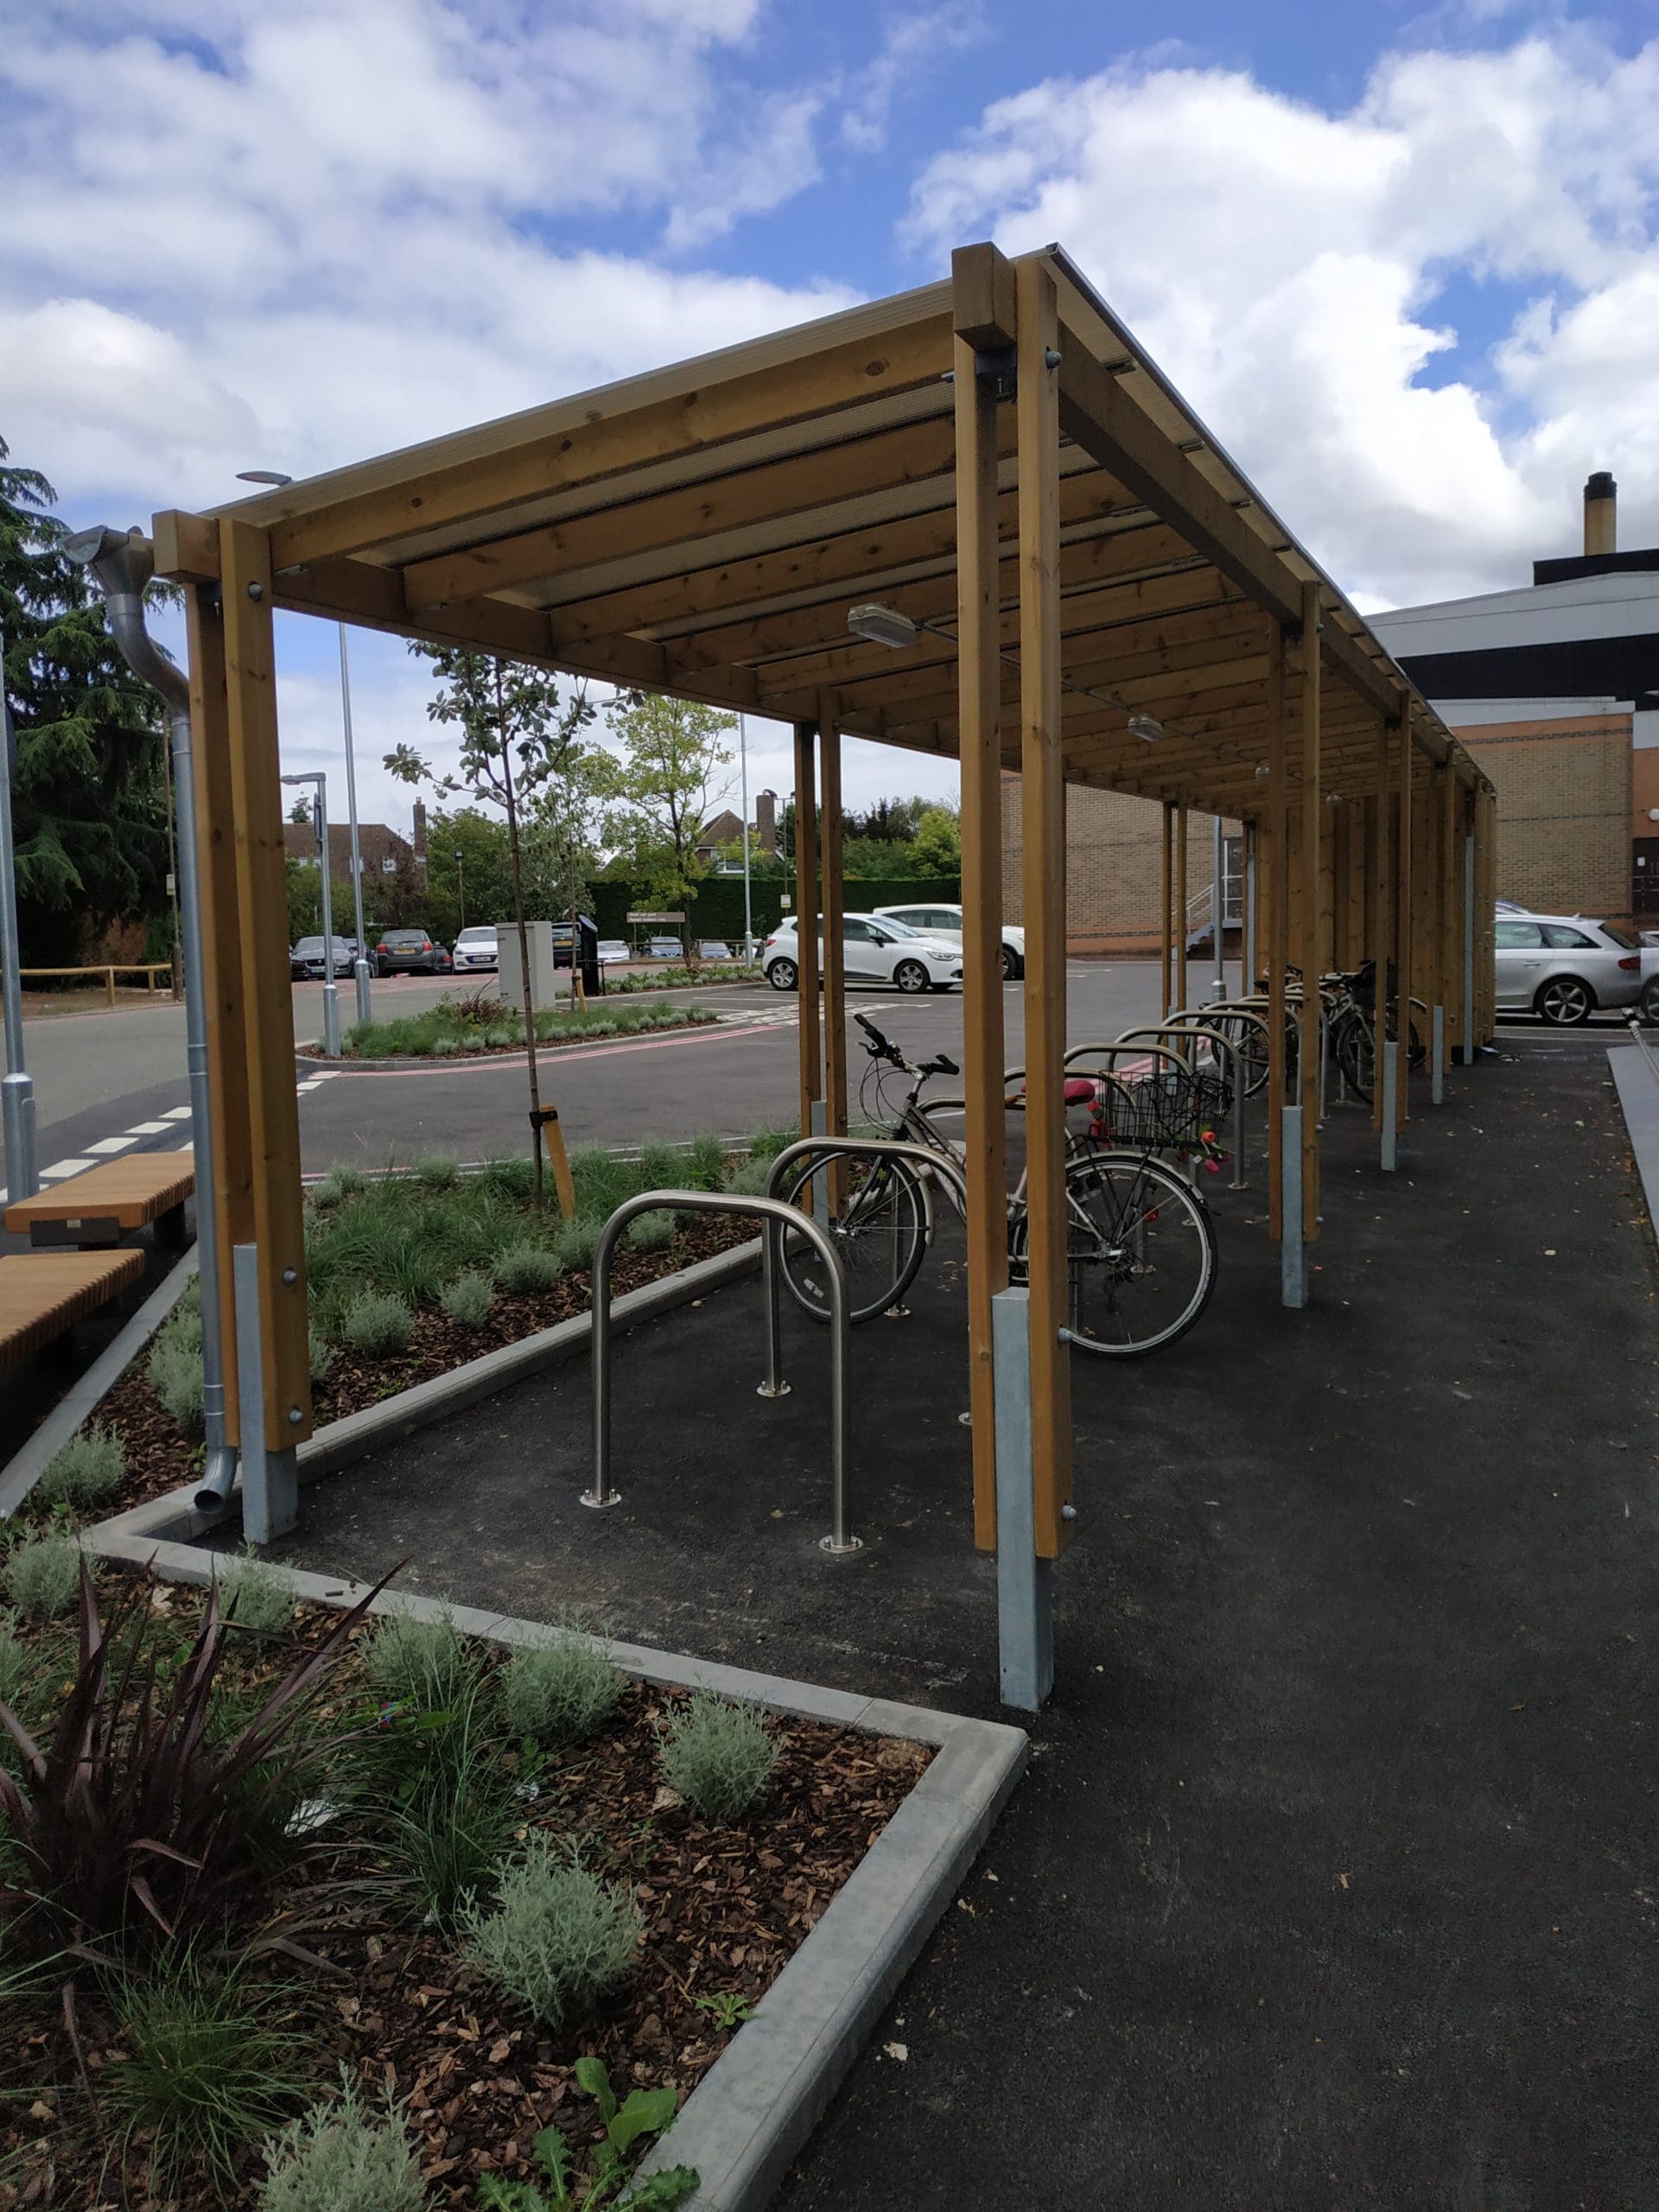 Exterior cycle parking and bin store wooden structure